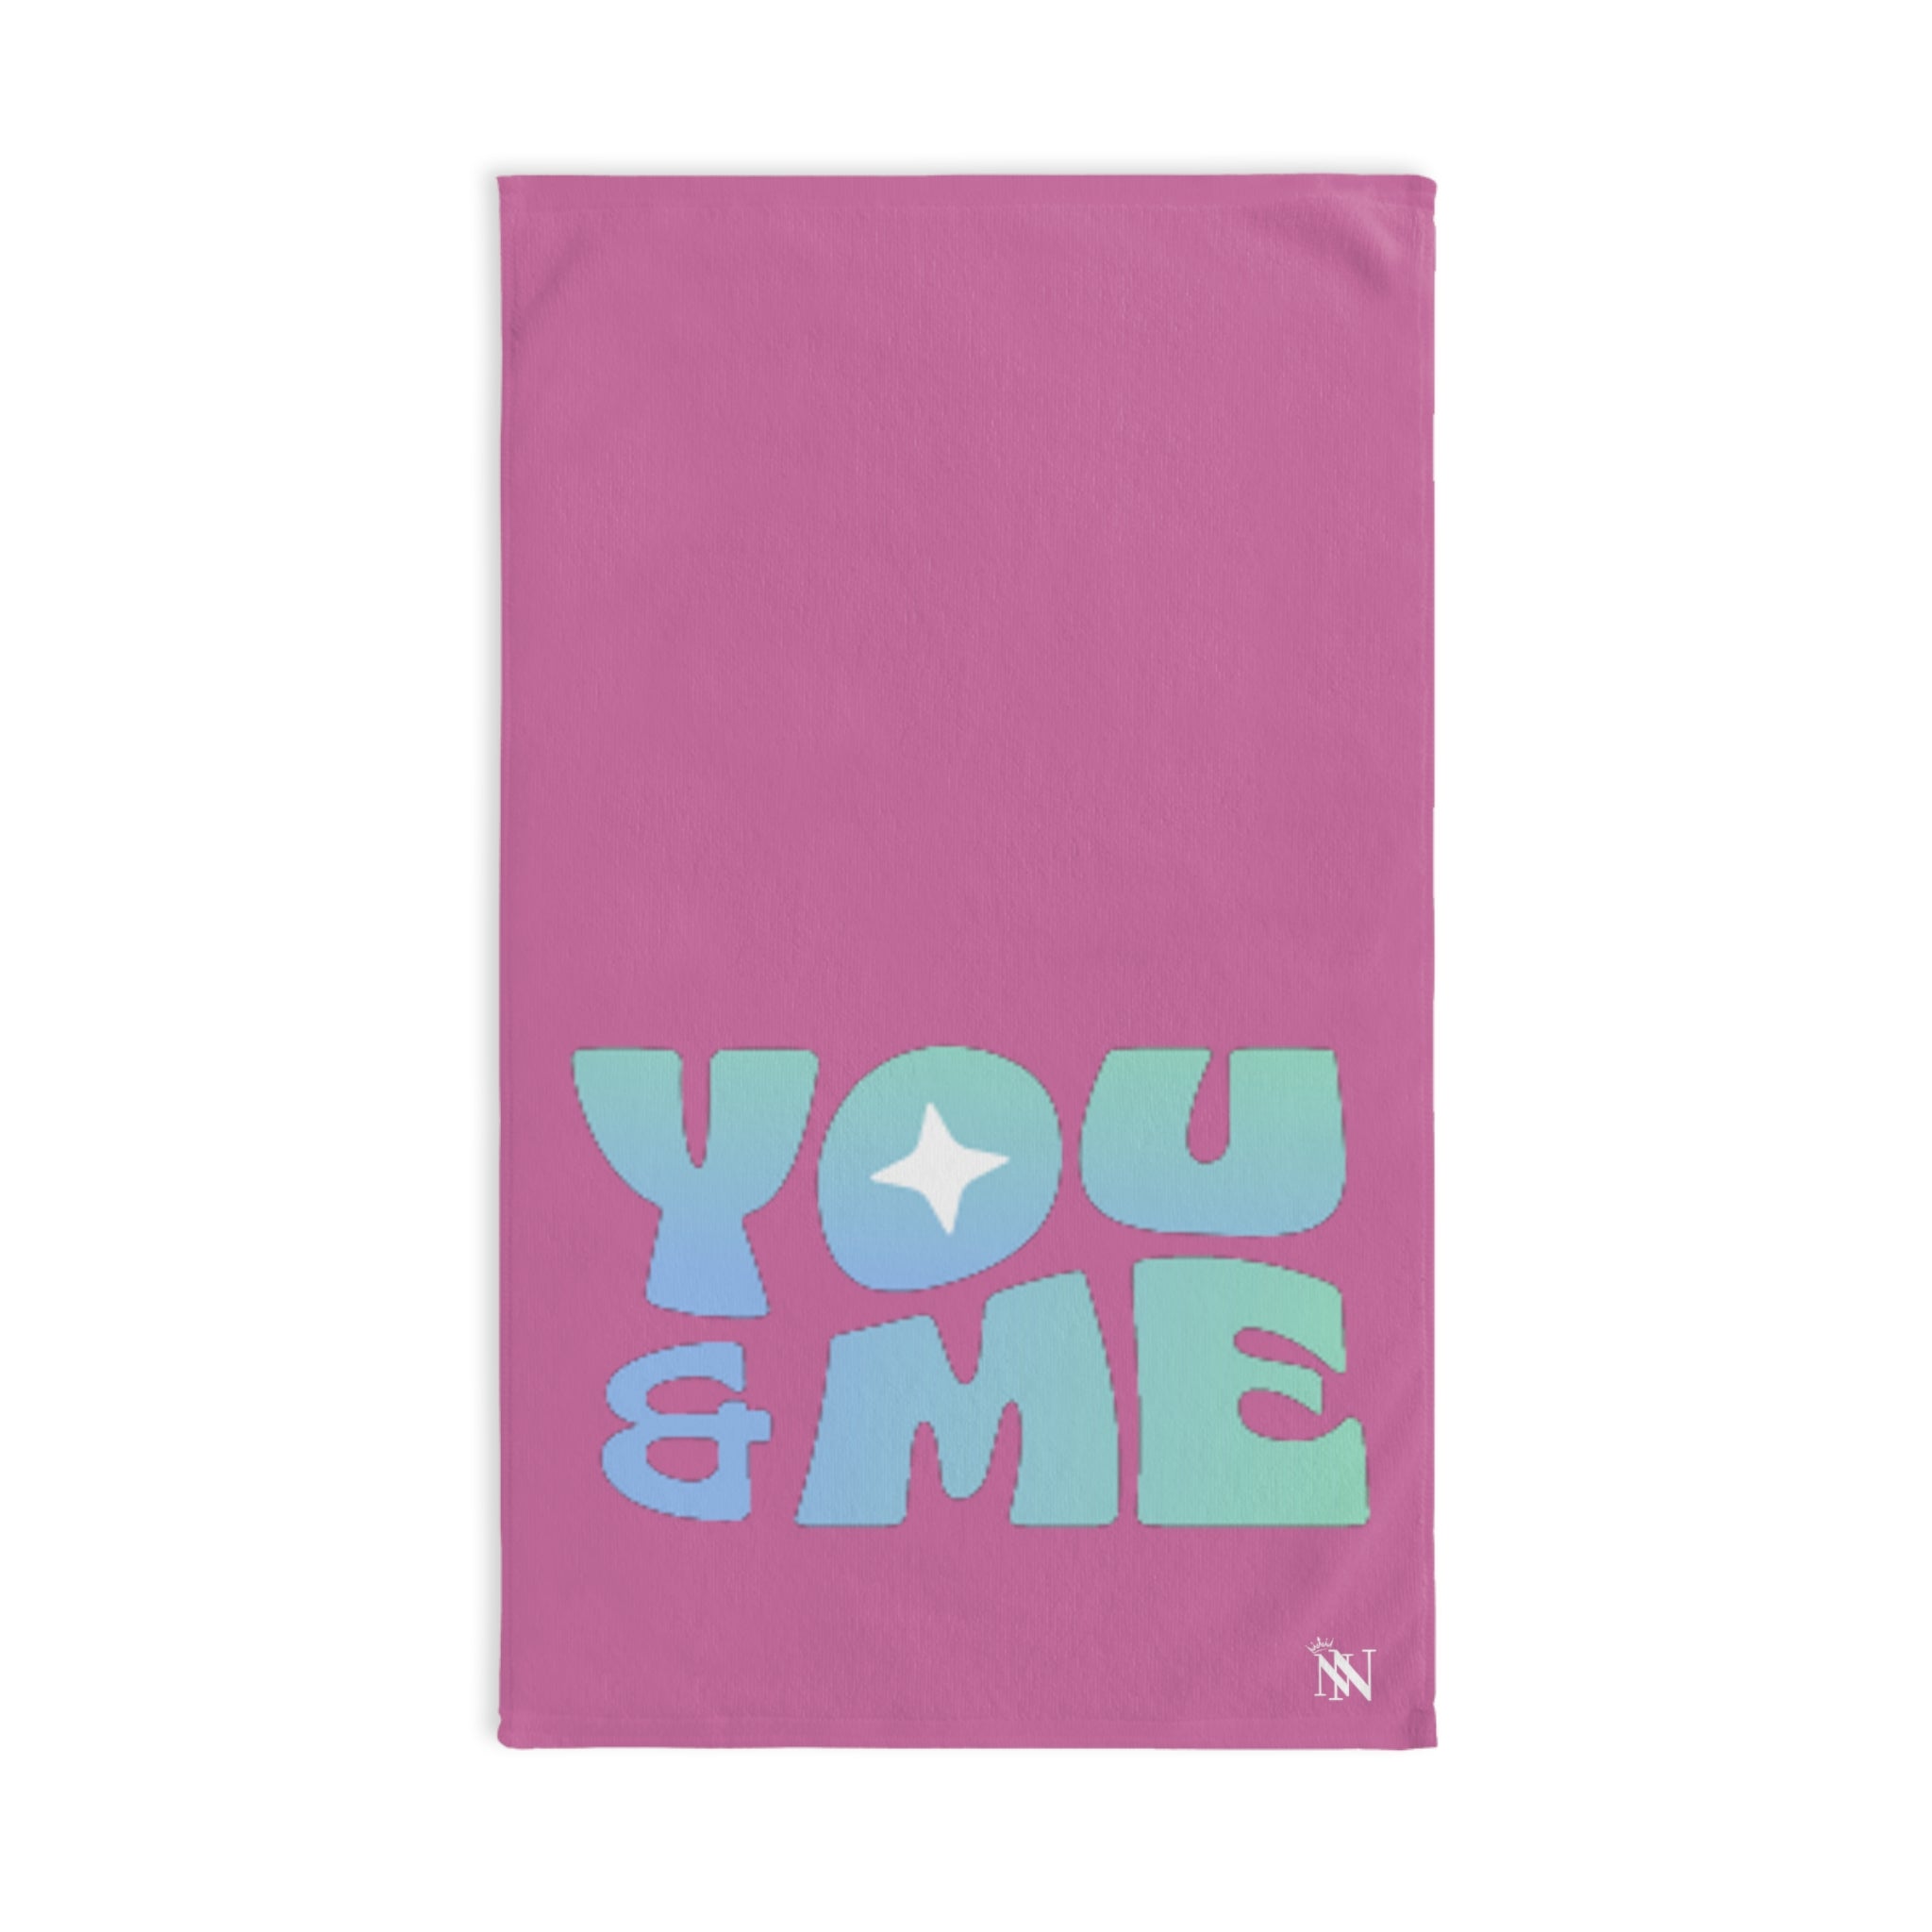 You Me TogetherPink | Novelty Gifts for Boyfriend, Funny Towel Romantic Gift for Wedding Couple Fiance First Year Anniversary Valentines, Party Gag Gifts, Joke Humor Cloth for Husband Men BF NECTAR NAPKINS